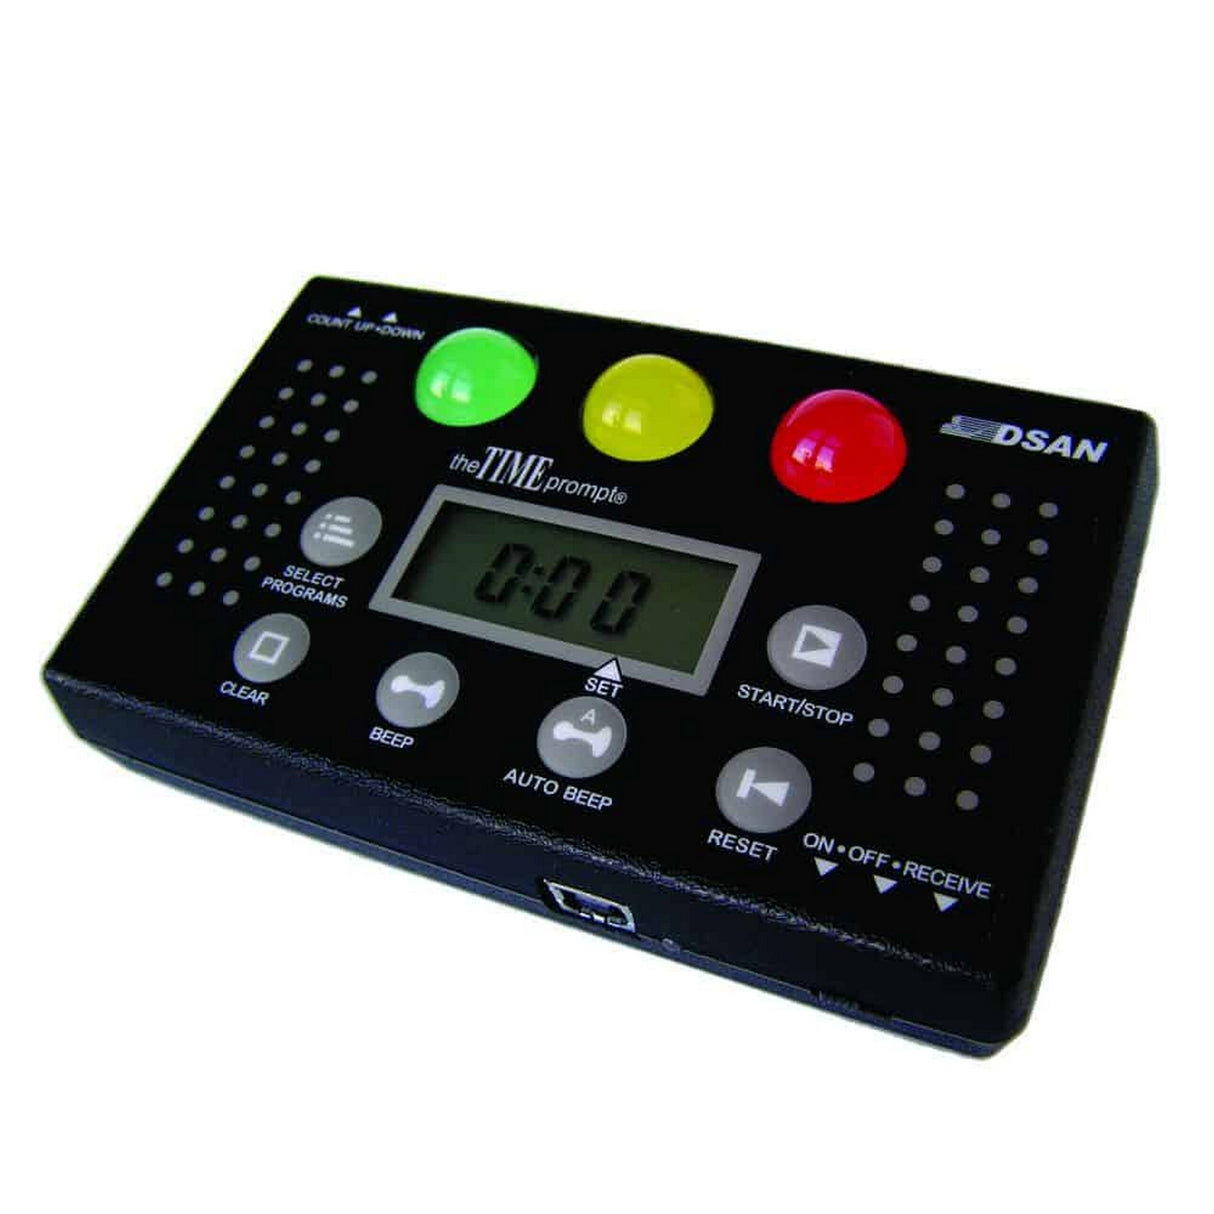 DSAN TMPT Battery-Powered TimePrompt Controller